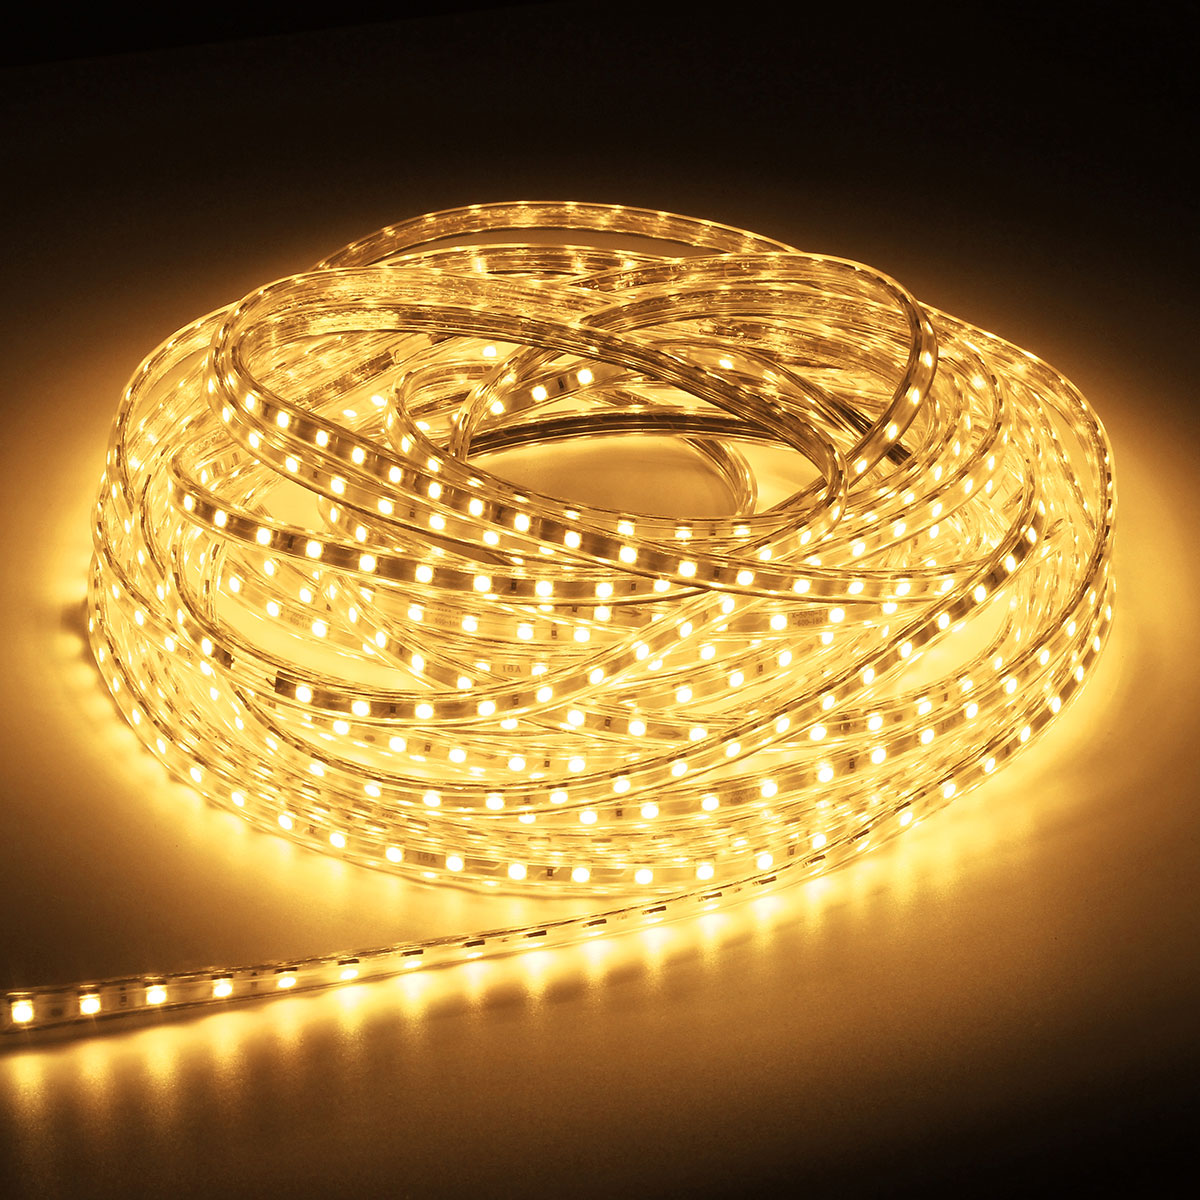 20M-5050-LED-SMD-Outdoor-Waterproof-Flexible-Tape-Rope-Strip-Light-Xmas-220V-1080114-8